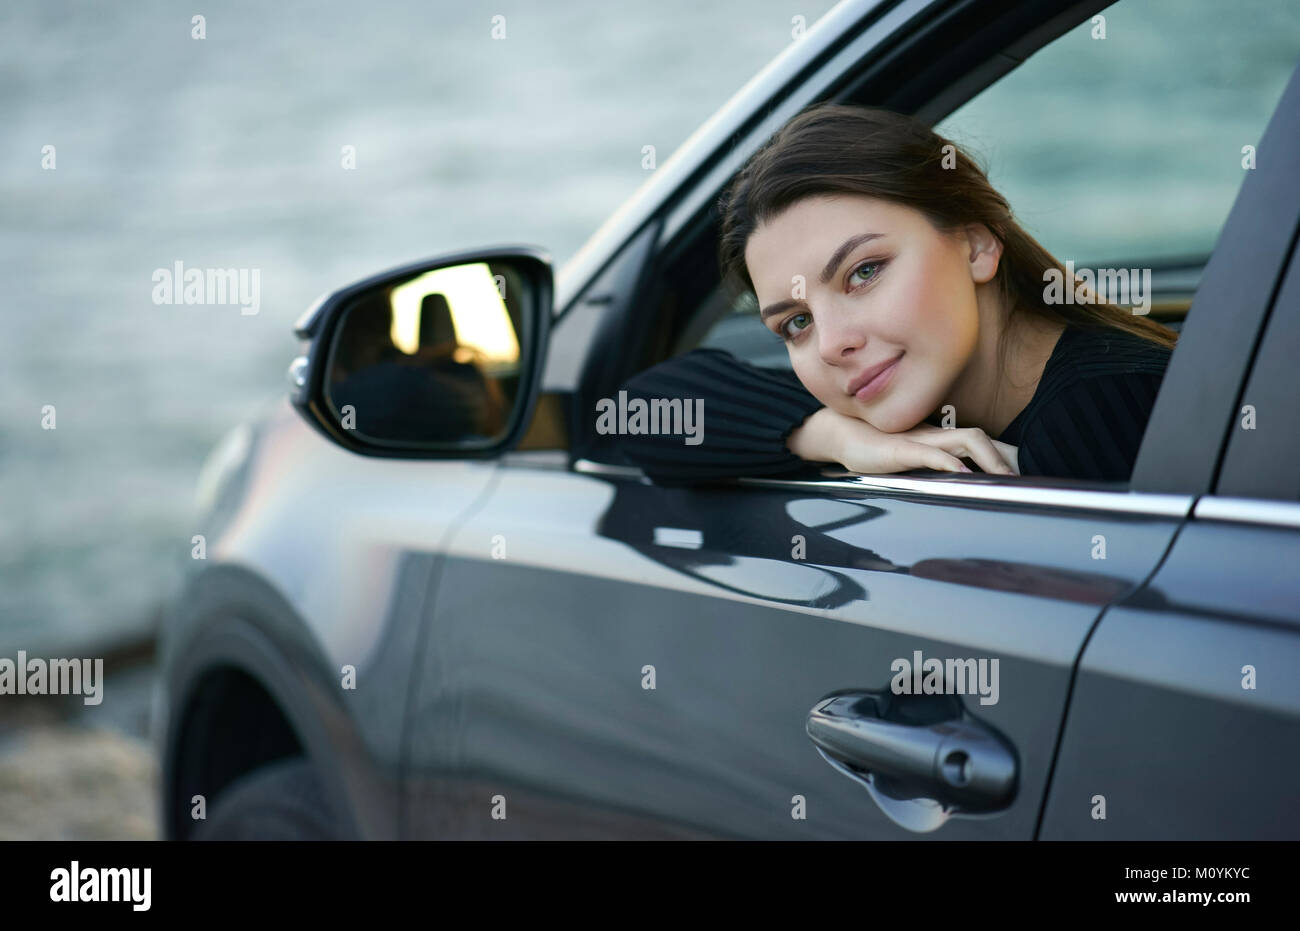 Smiling Caucasian woman in car window Banque D'Images